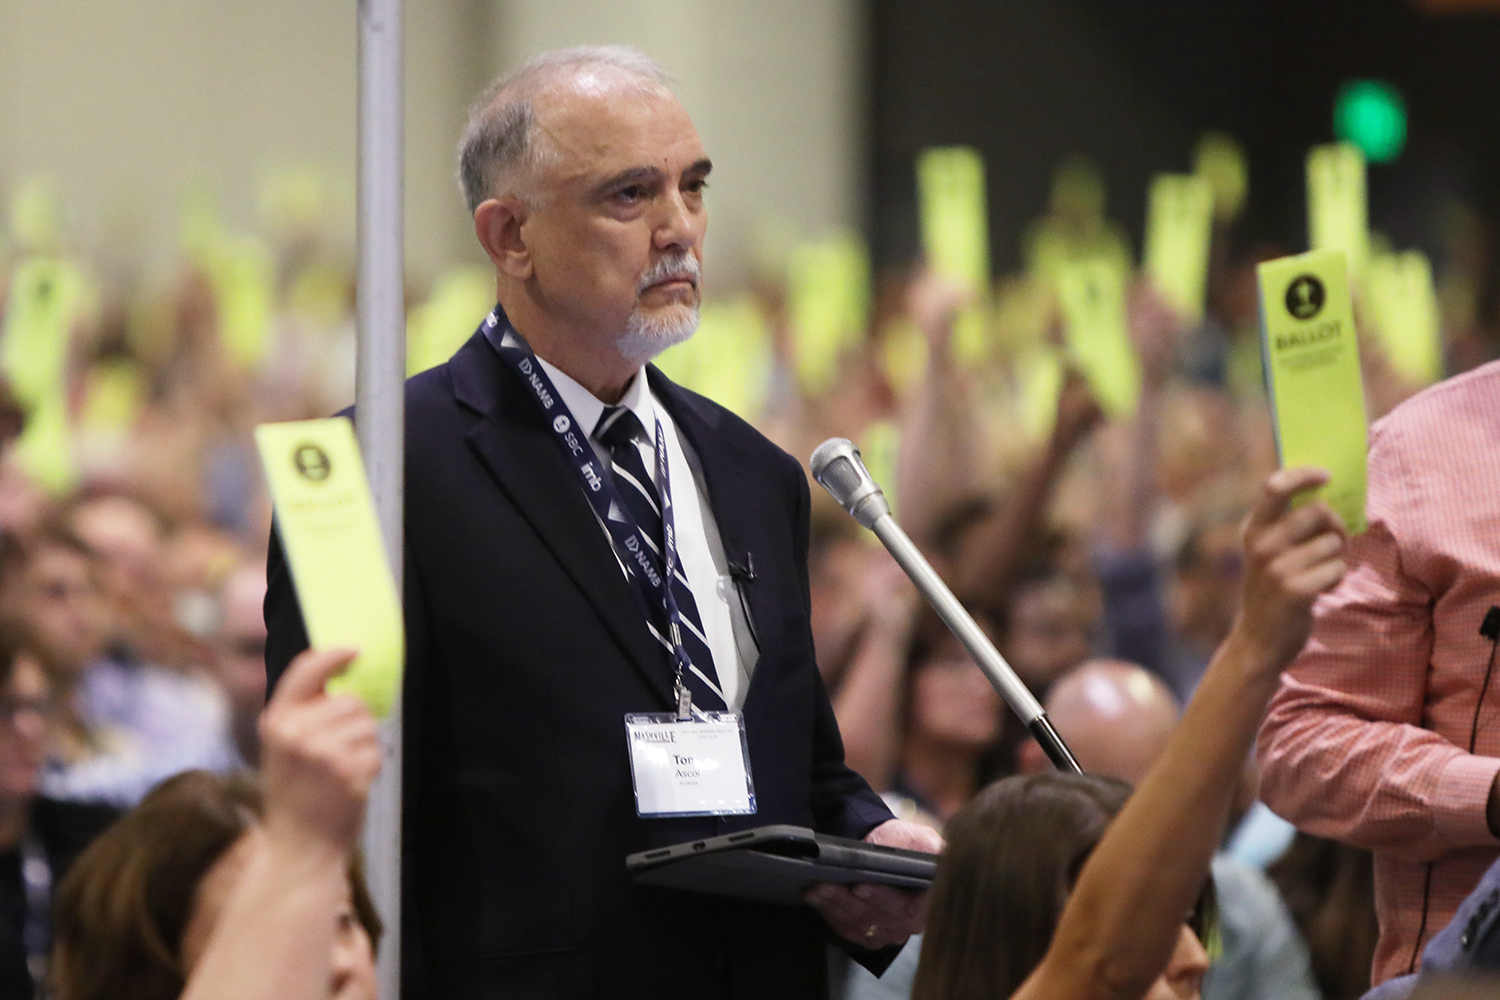 Tom Ascoll waits near a mic during the SBC annual meeting at the Music City Center in Nashville, Tuesday, June 15, 2021. RNS Photo by Kit Doyle